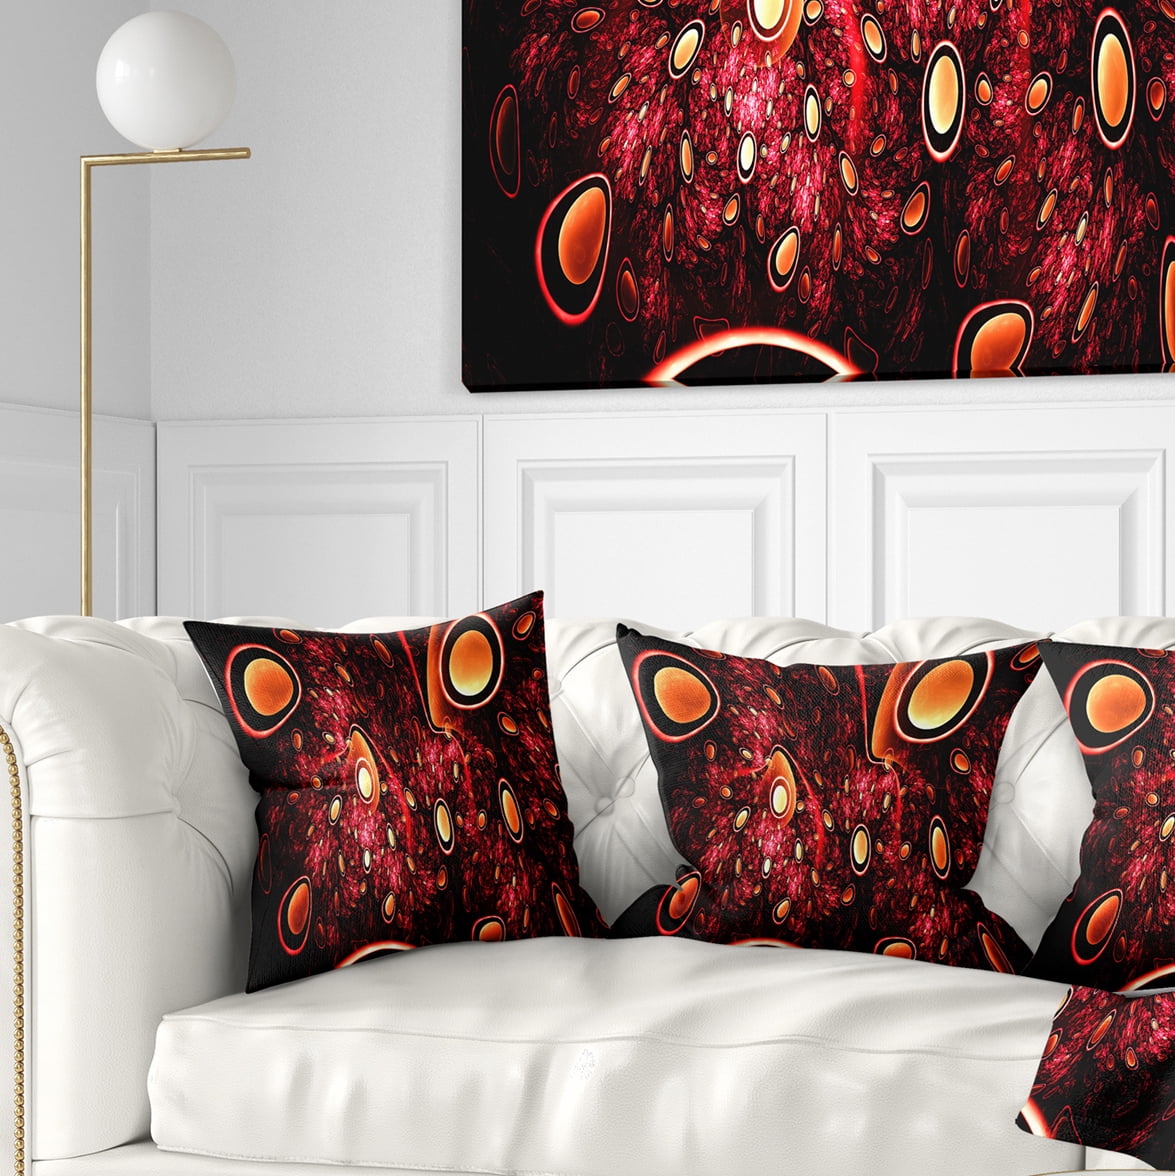 Insert Printed On Both Side x 16 in in Sofa Throw Pillow 16 in Designart CU16522-16-16 Red 3D Surreal Design Abstract Cushion Cover for Living Room